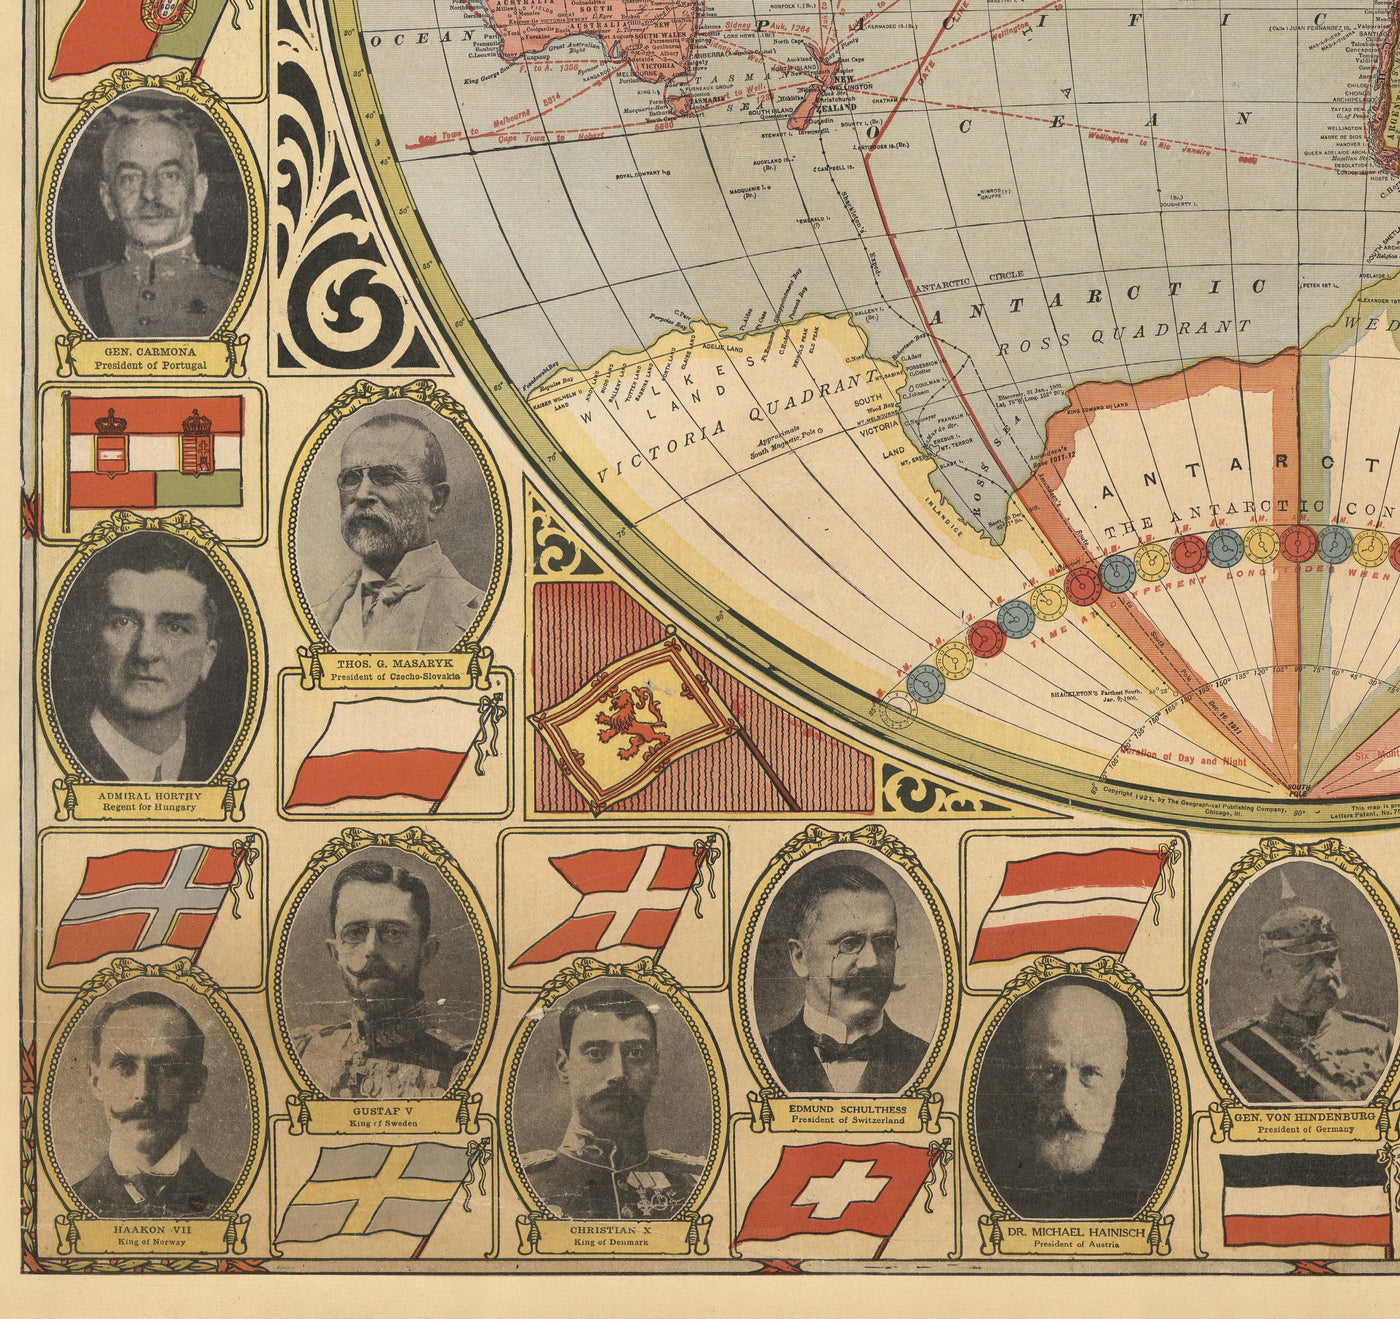 Old Flat Earth Map with World Leaders, 1921 - Shipping Lanes, Stalin, Mussolini, King George, Hoover